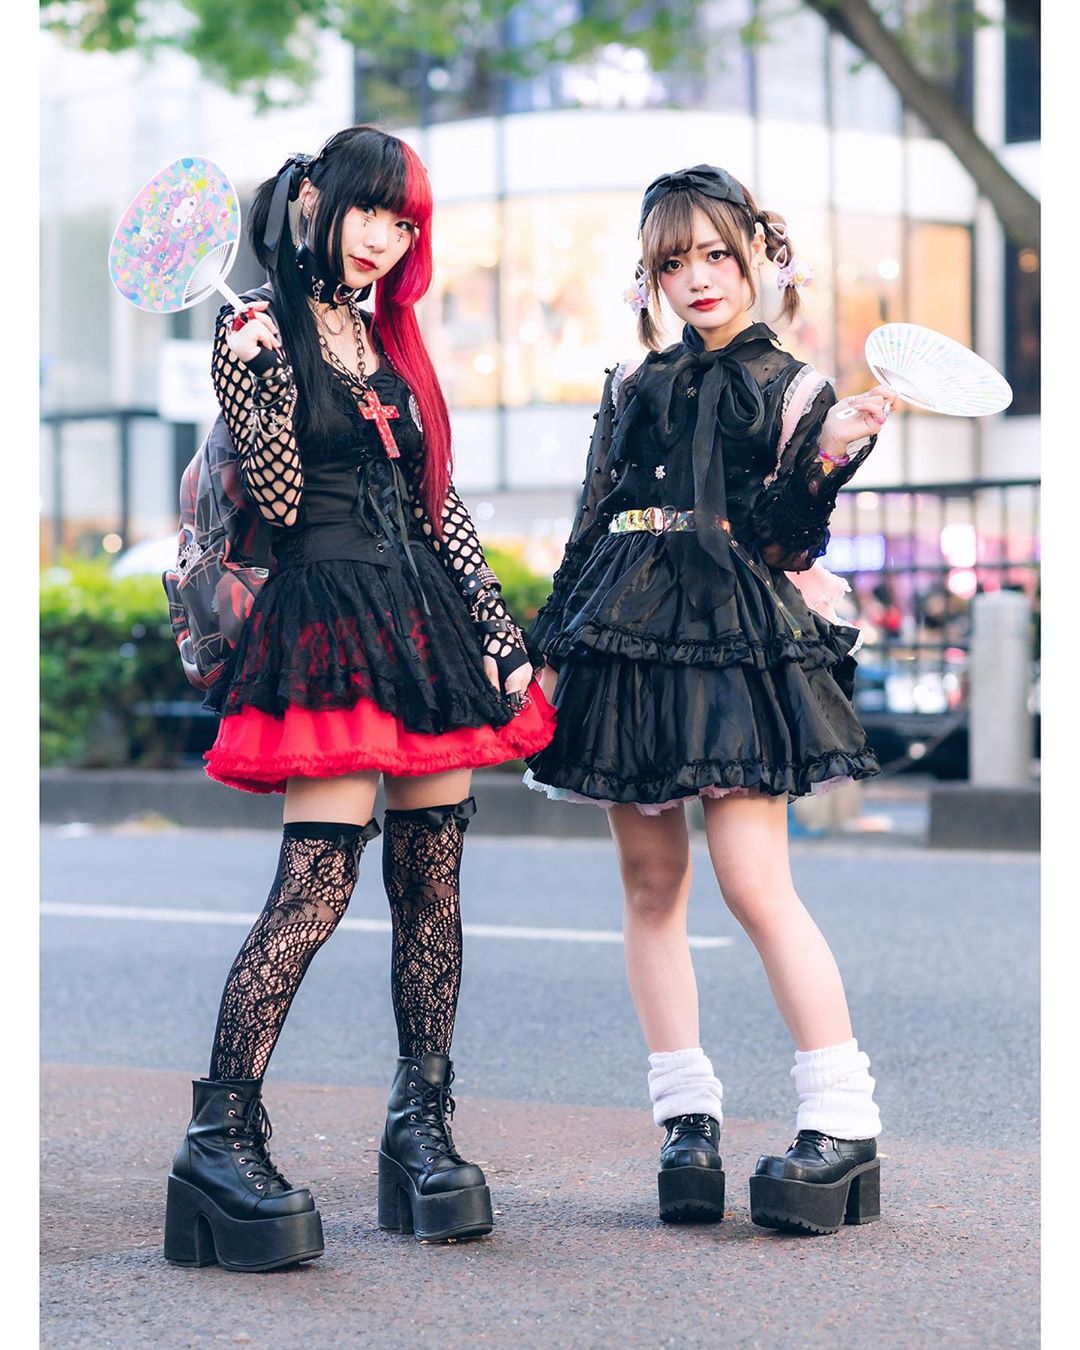 Tokyo Fashion Japanese Gothic Looks By 17 Year Old Remon Remon1103 And 20 Year Old Yunyun